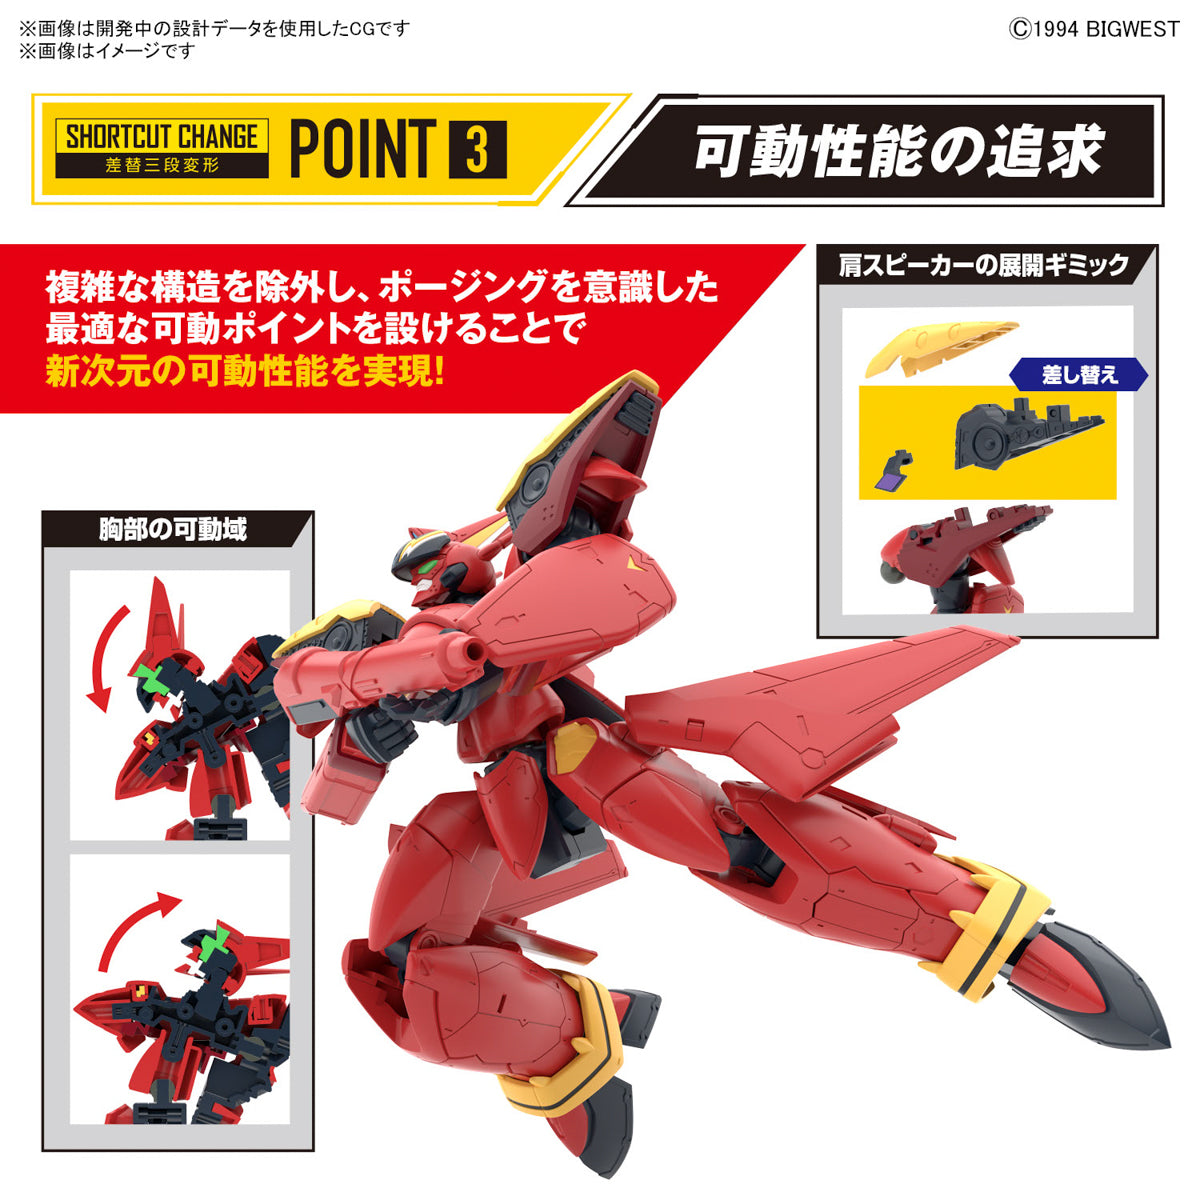 Bandai Macross Plus HG 1/100 YF-19 Fire Valkyrie with Sound Booster Plastic Model Action Toy VCA Gundam Singapore